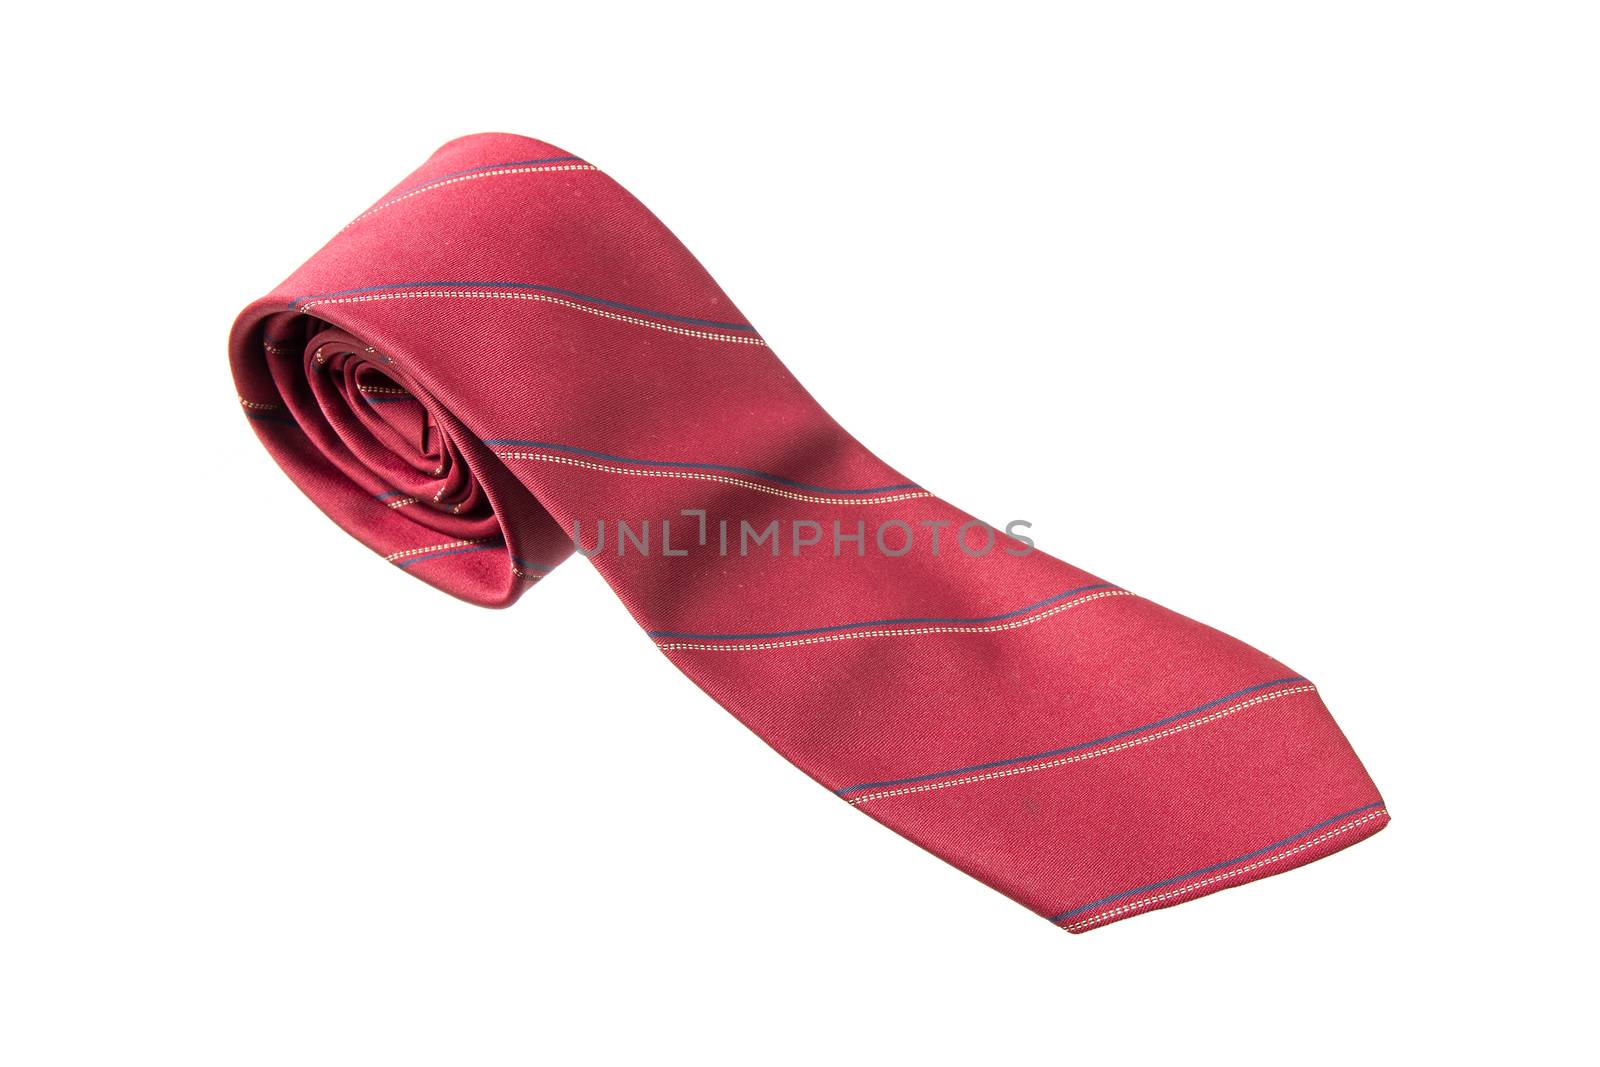 red with strips business neck tie isolated on white background